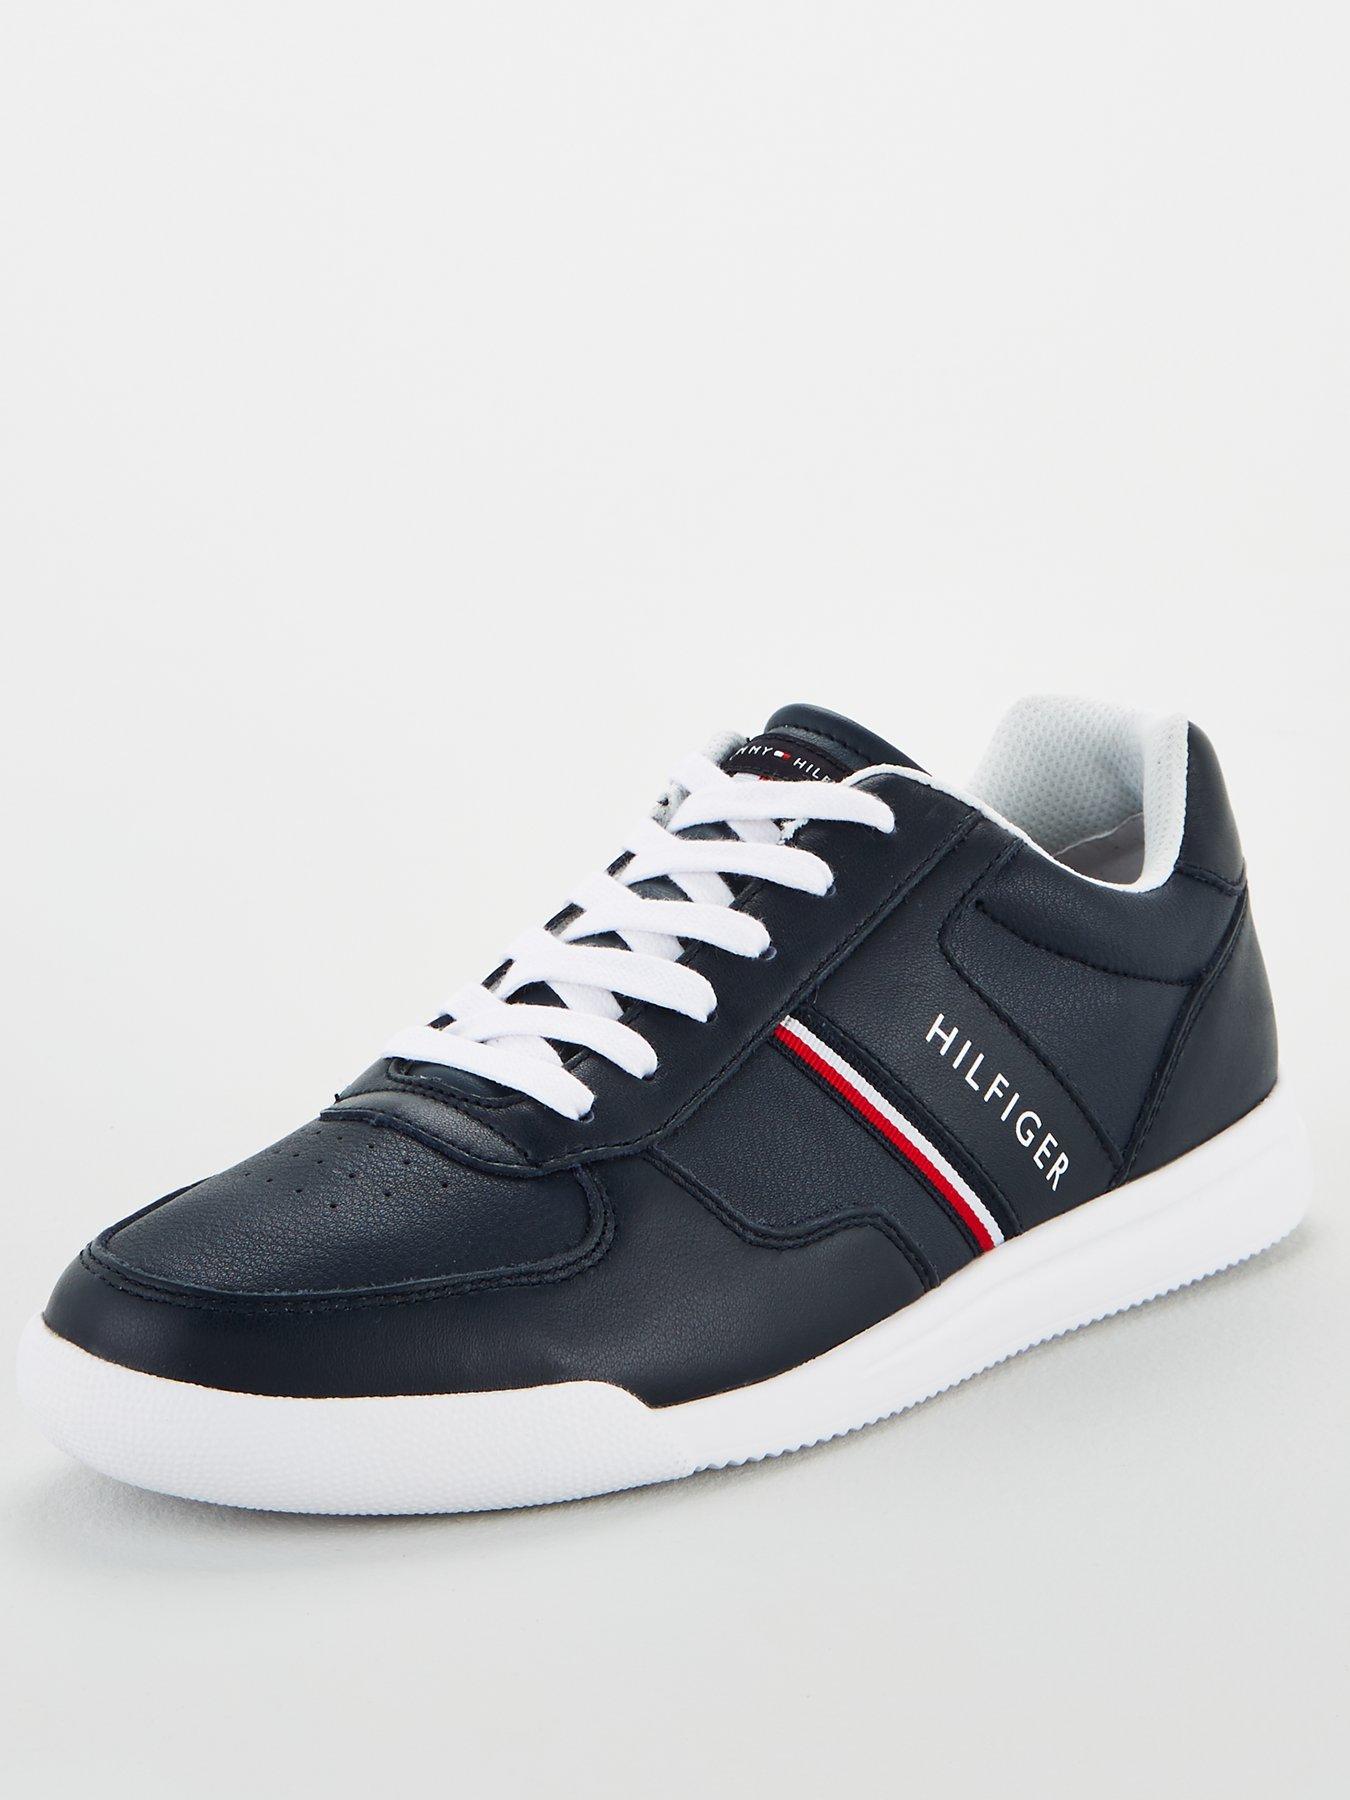 tommy hilfiger trainers size 12